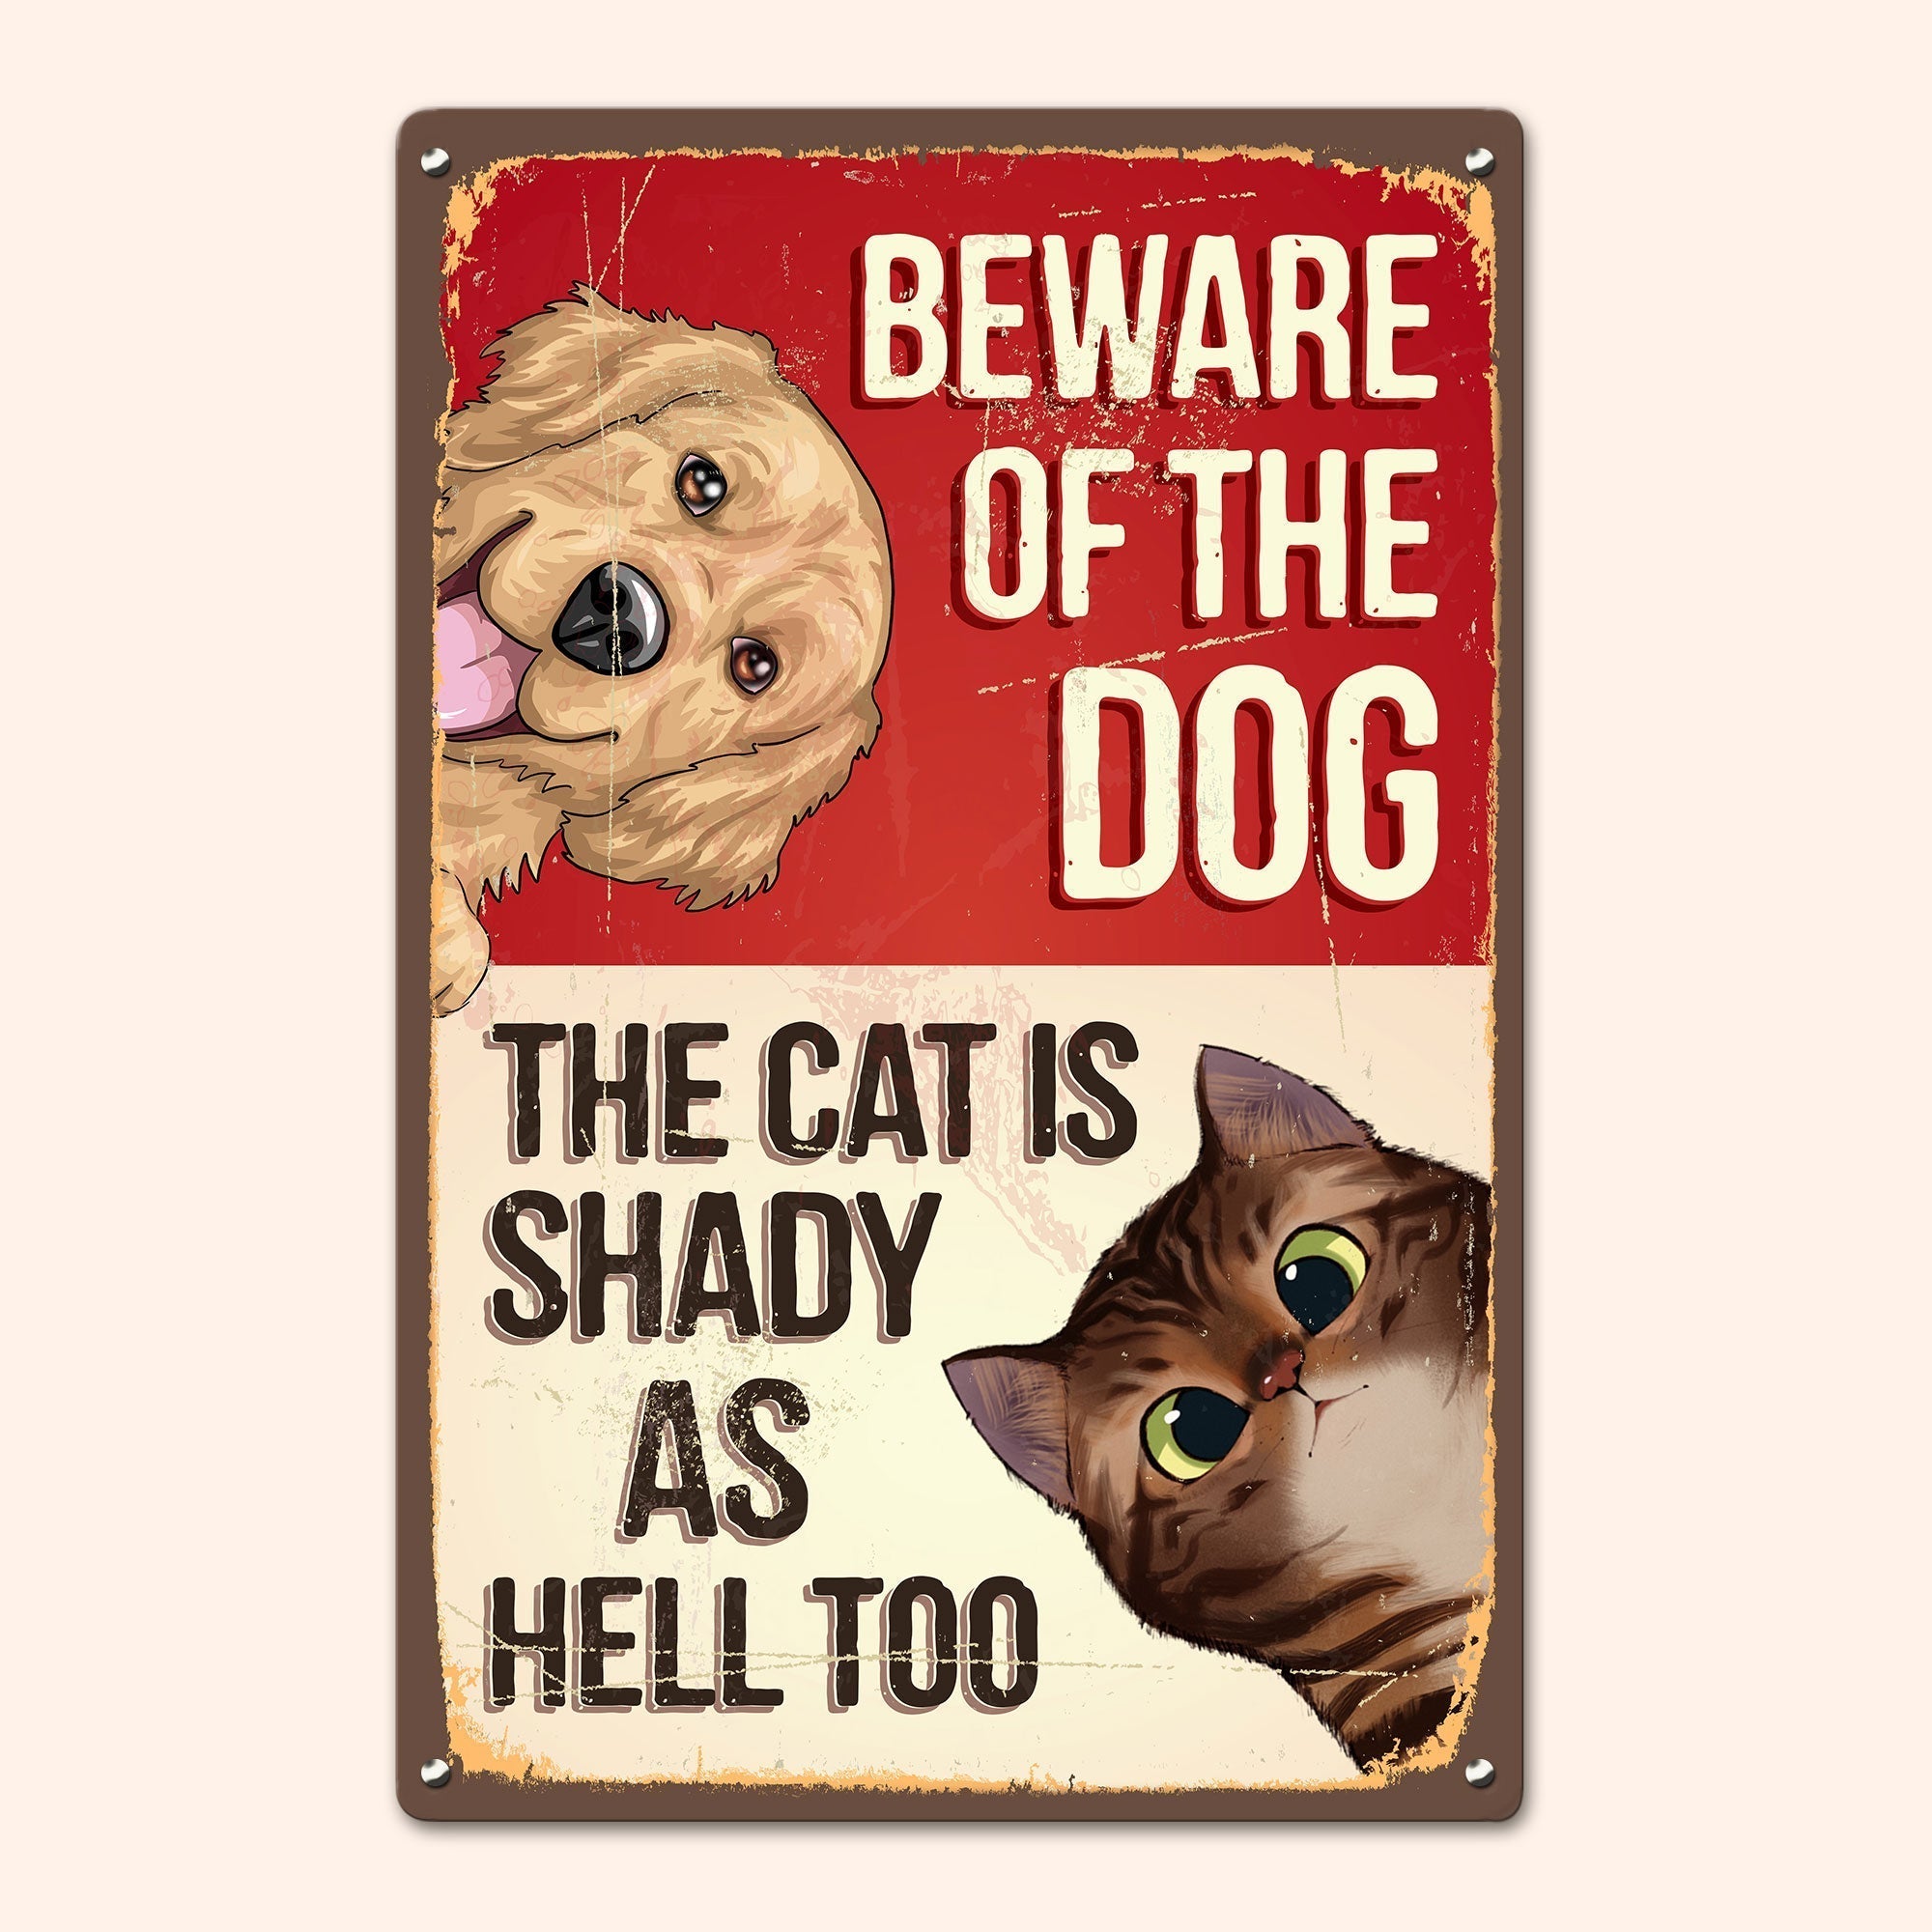 Beware Of The Dog, The Cat Is Shady - Personalized Metal Sign - Funny, Outdoor Decor Gift For Pet Lovers, Dog & Cat Owner, Dog Mom, Cat Dad